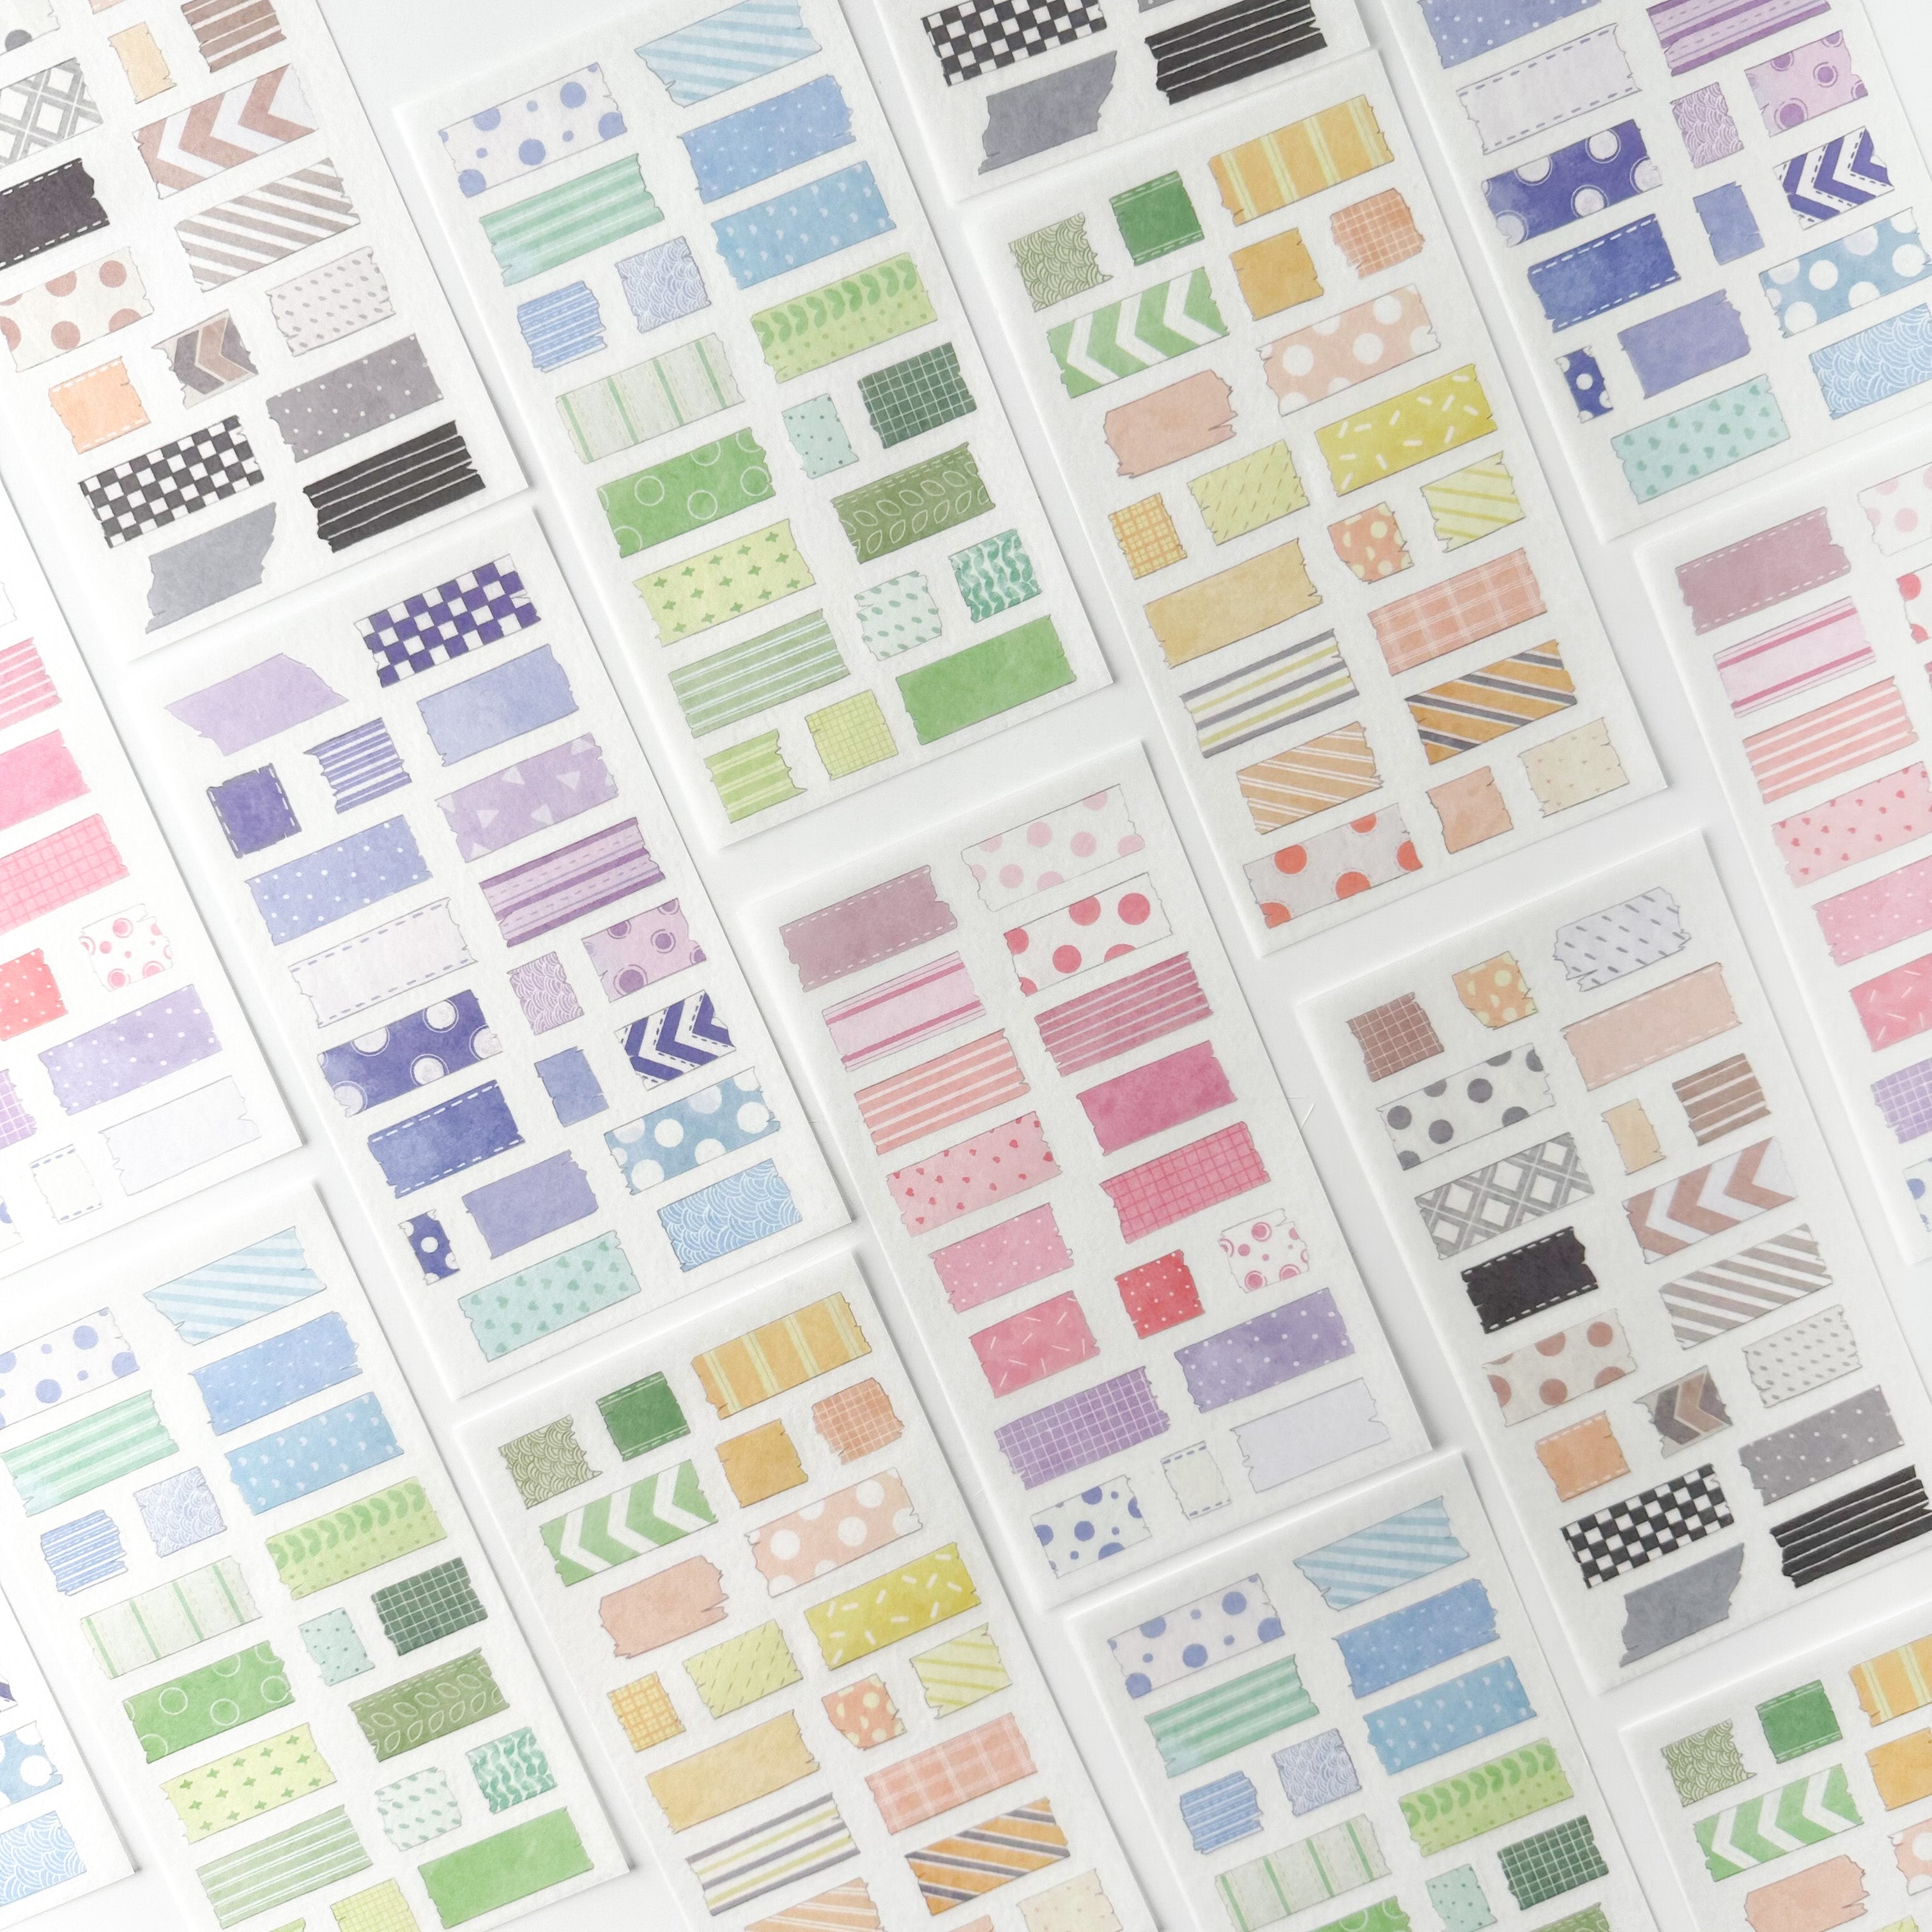 Explore creativity with our Colorful Washi Tape Shaped Sticker Sheets, featuring a variety of colorful washi tape-inspired sticker shapes. Perfect for adding playful and decorative accents to your projects. These stickers are sold at BBB Supplies Craft Shop.